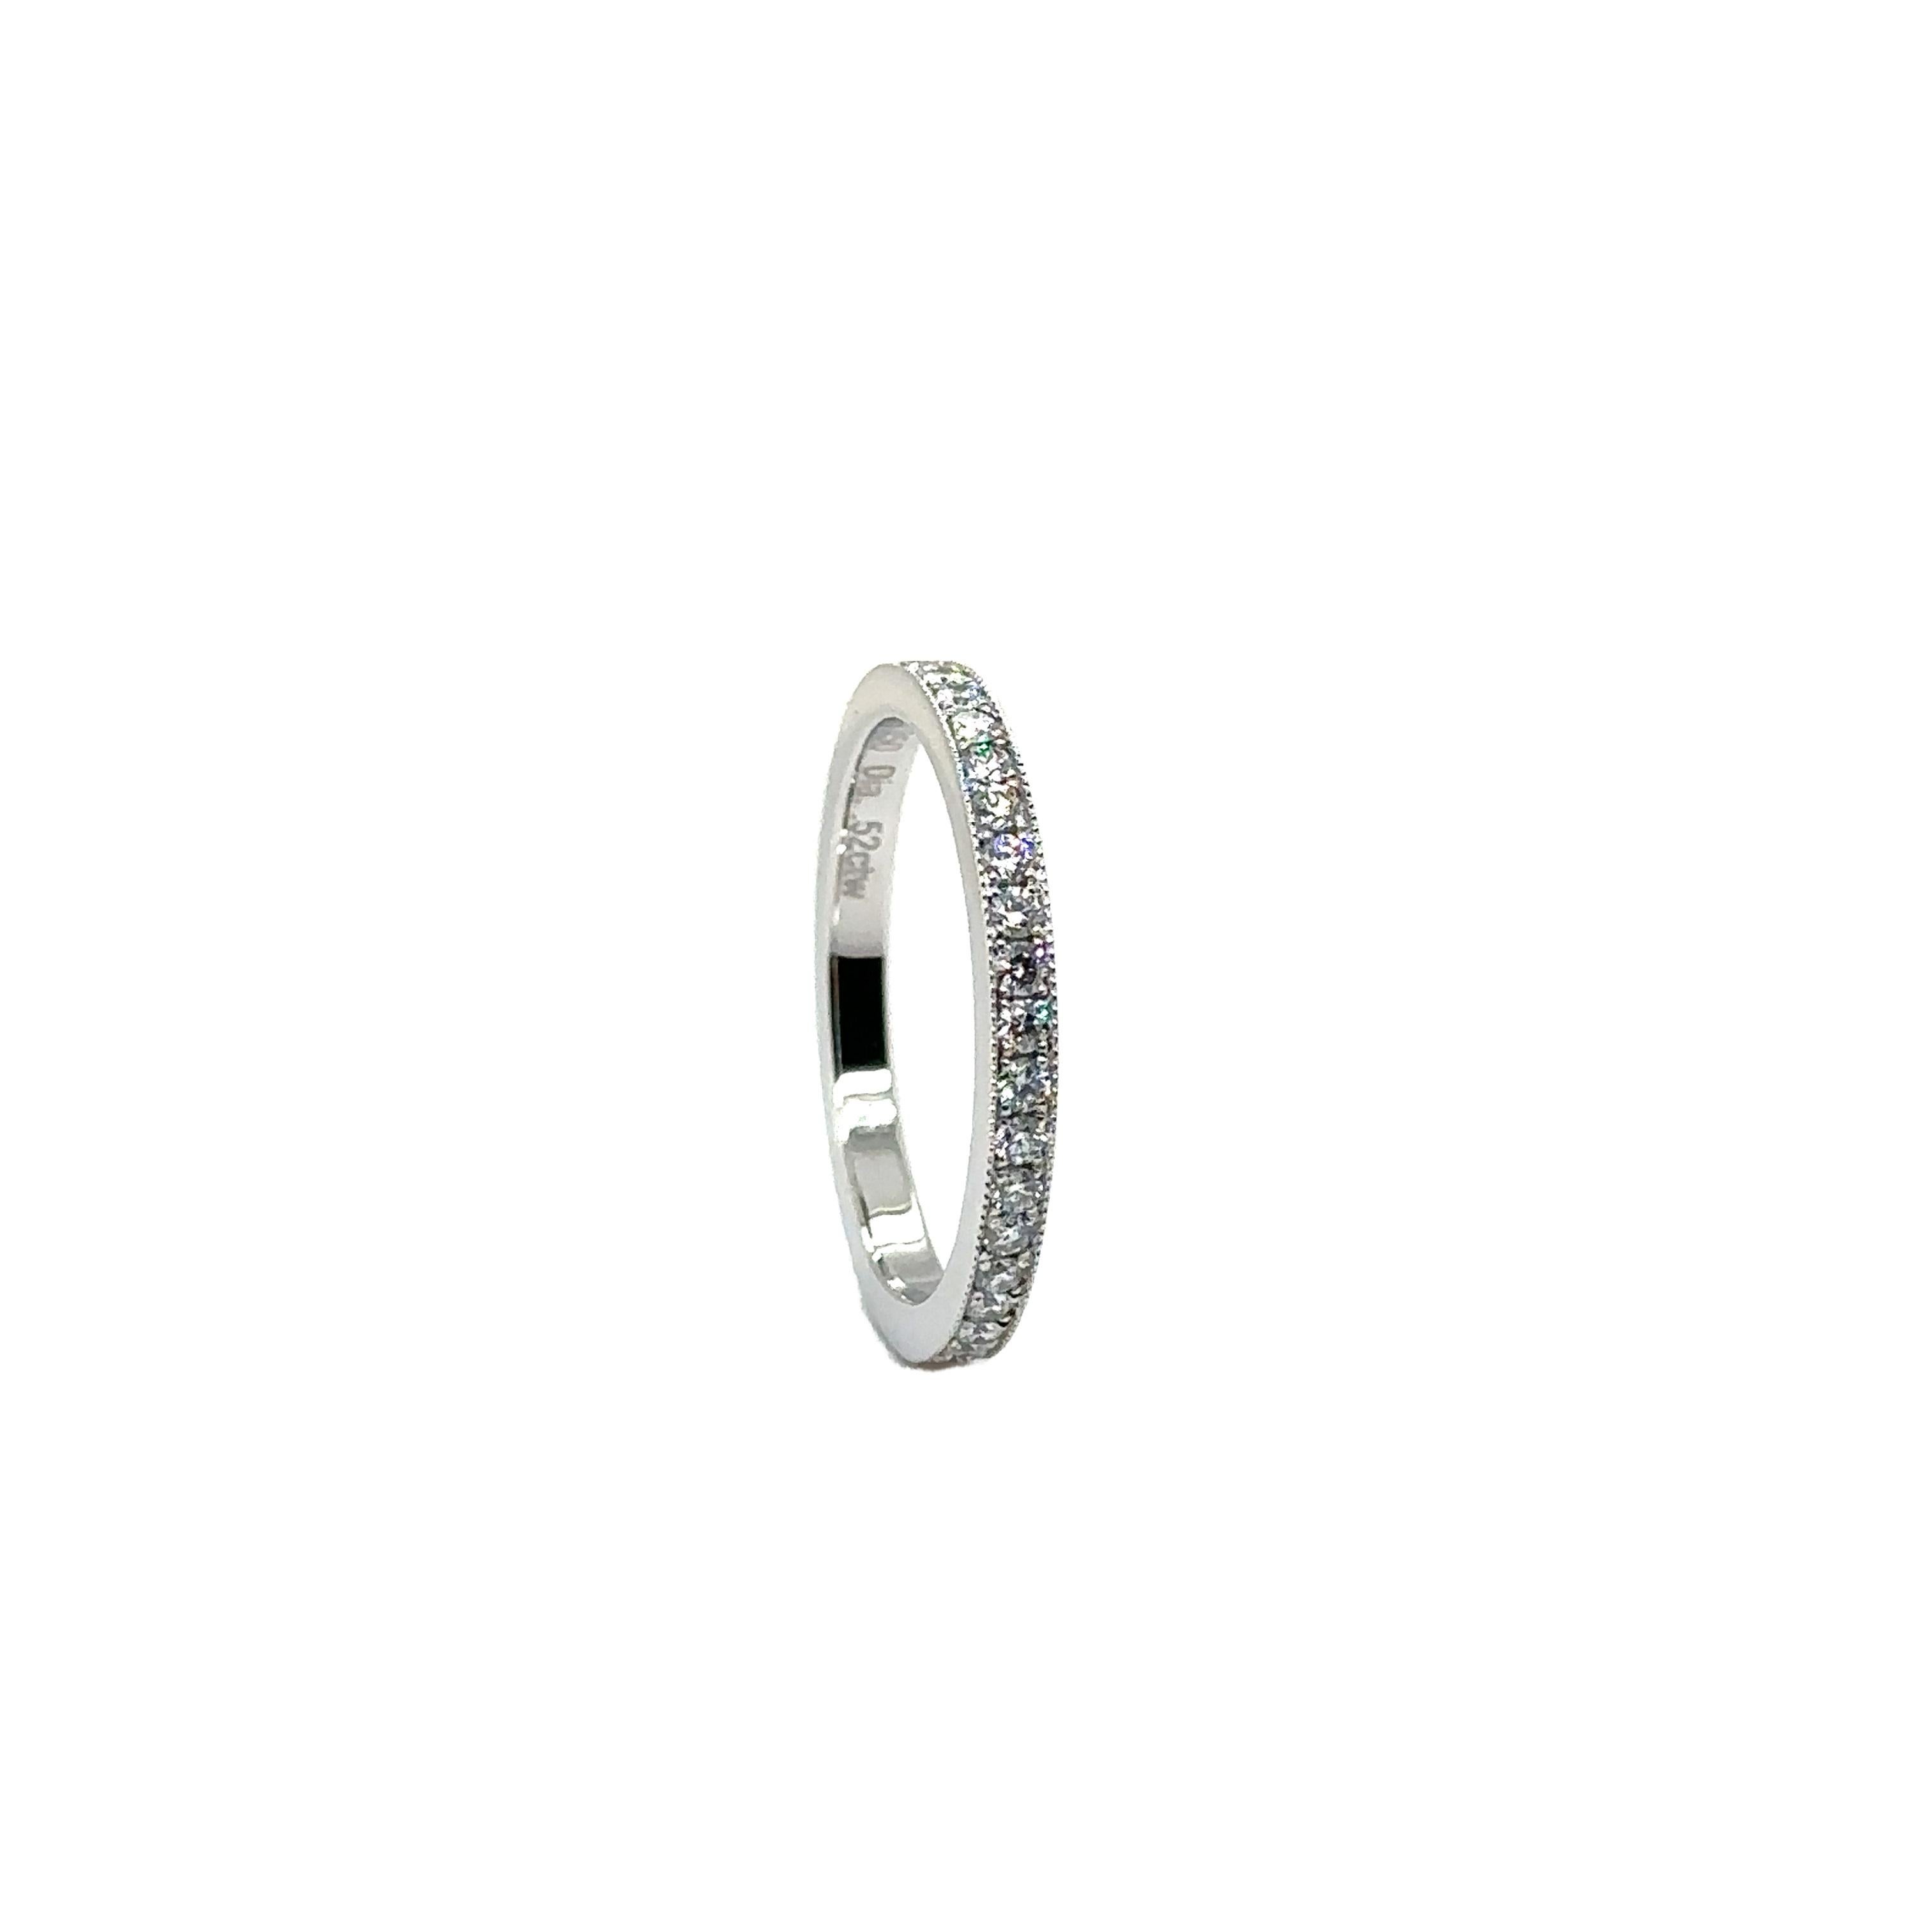 WB-39-PLAT - PLATINUM WEDDING BAND with 0.52 CT DIAMONDS For Sale 1